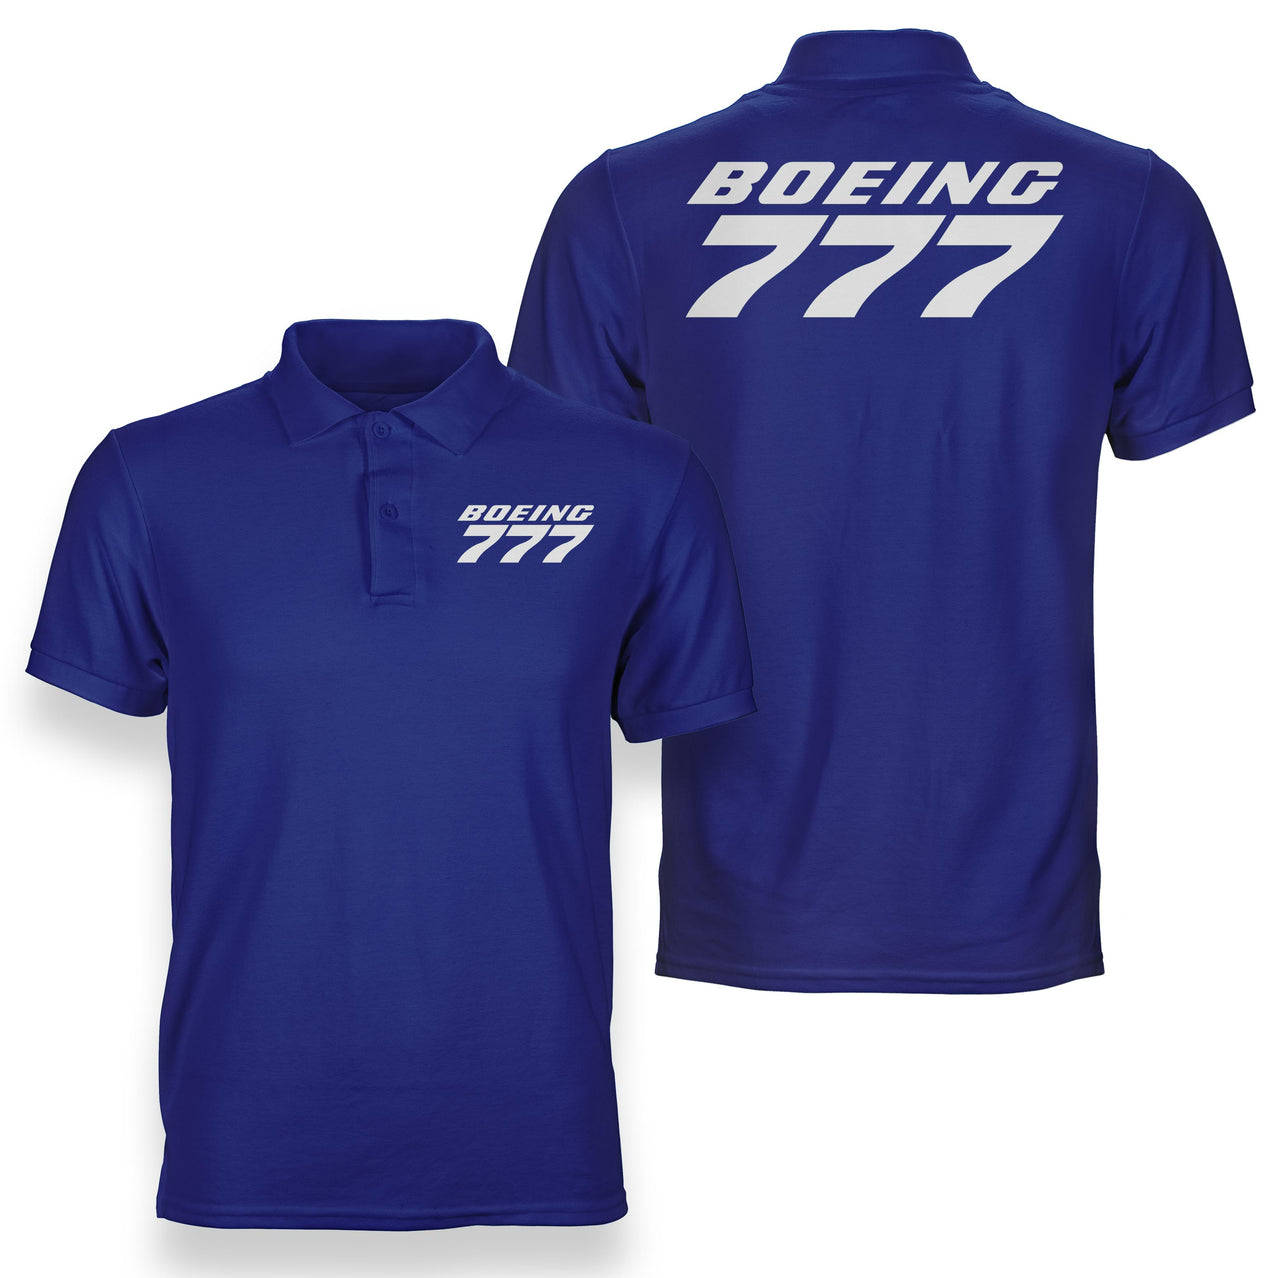 Boeing 777 & Text Designed Double Side Polo T-Shirts